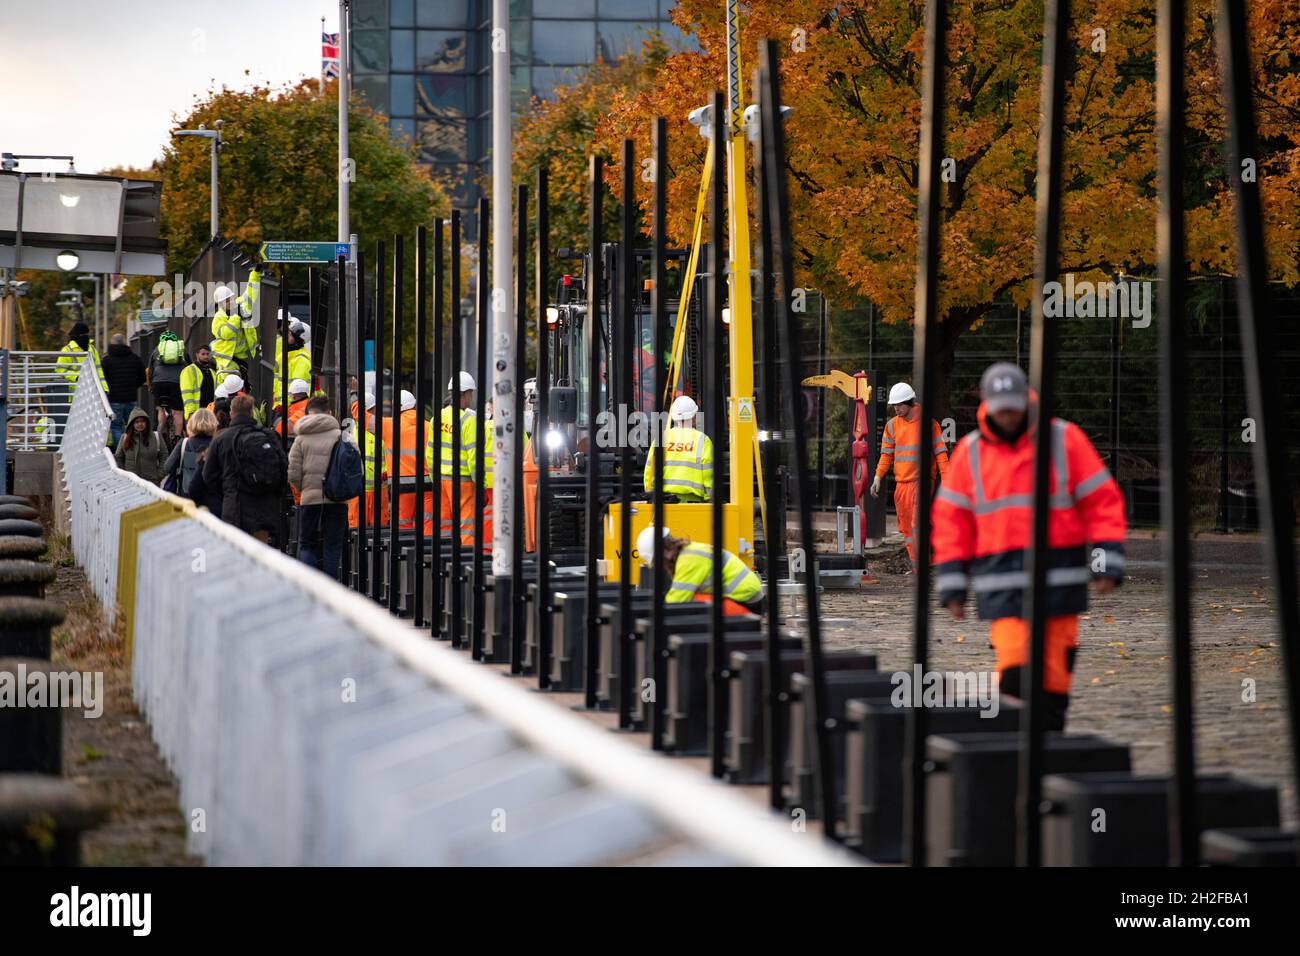 Glasgow, Scotland, UK. 21st Oct, 2021. PICTURED: Workmen wearing high viz PPE install part of the security perimeter fence to prevent any protestors gaining entry to the site. 10 days until the start of COP26. The COP26 site showing temporary structures half built on the grounds of the Scottish Event Campus (SEC) Previously known as Scottish Exhibition and Conference Centre (SECC). Security fences with a ‘ring of steel' encapsulates the COP26 conference site. CCTV stations with emergency lights and loudspeakers are positioned all over the site. Credit: Colin Fisher/Alamy Live News Stock Photo